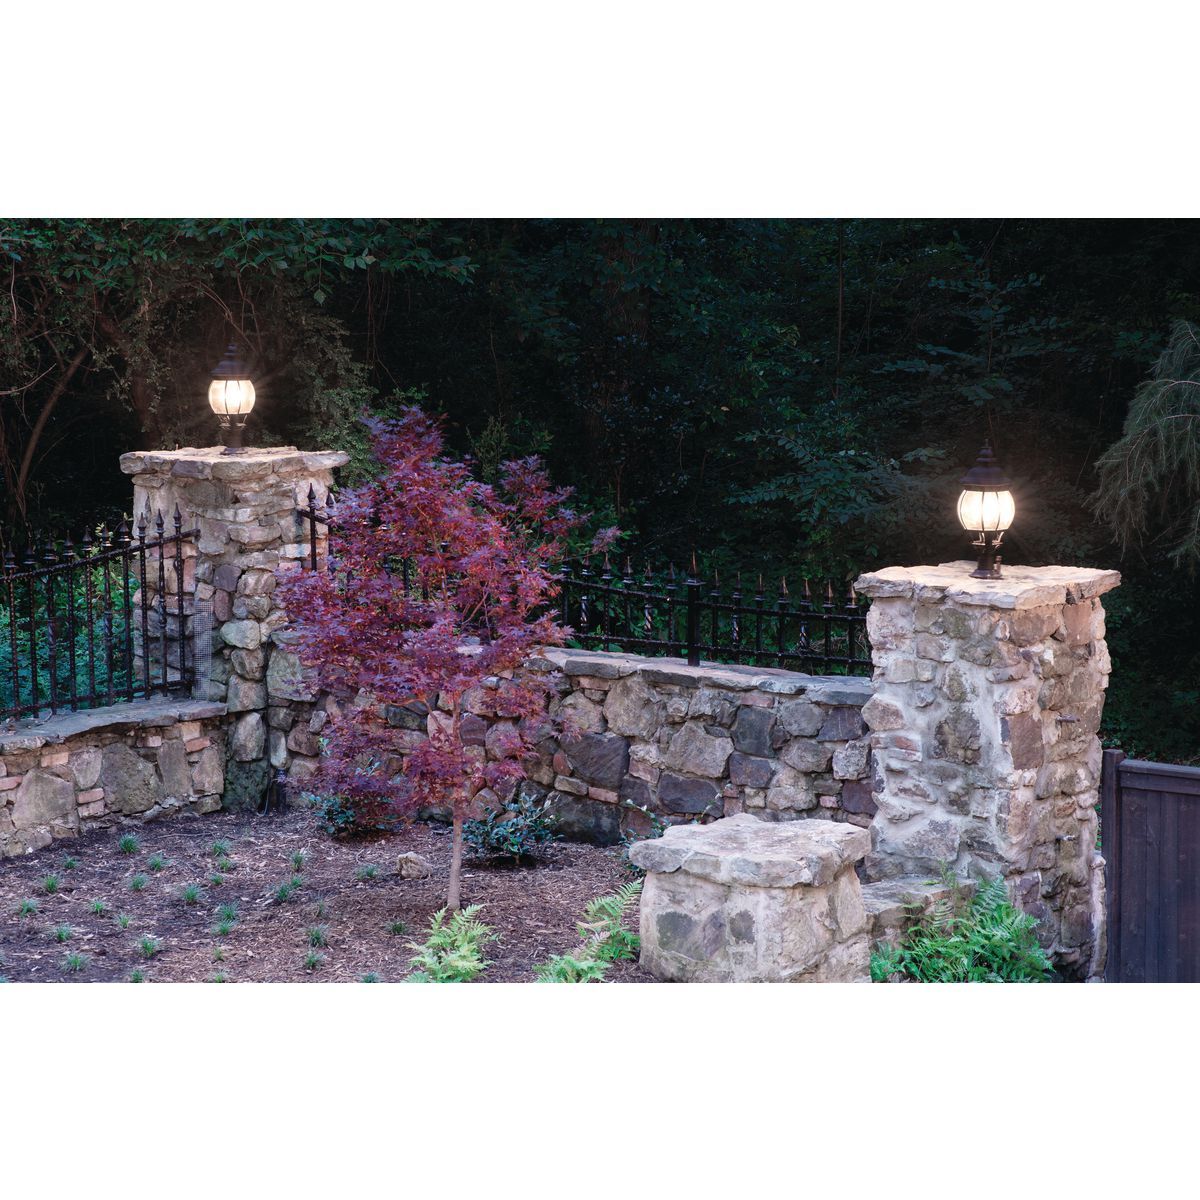 Maximize Your Outdoor Lighting for a Worry-Free Vacation